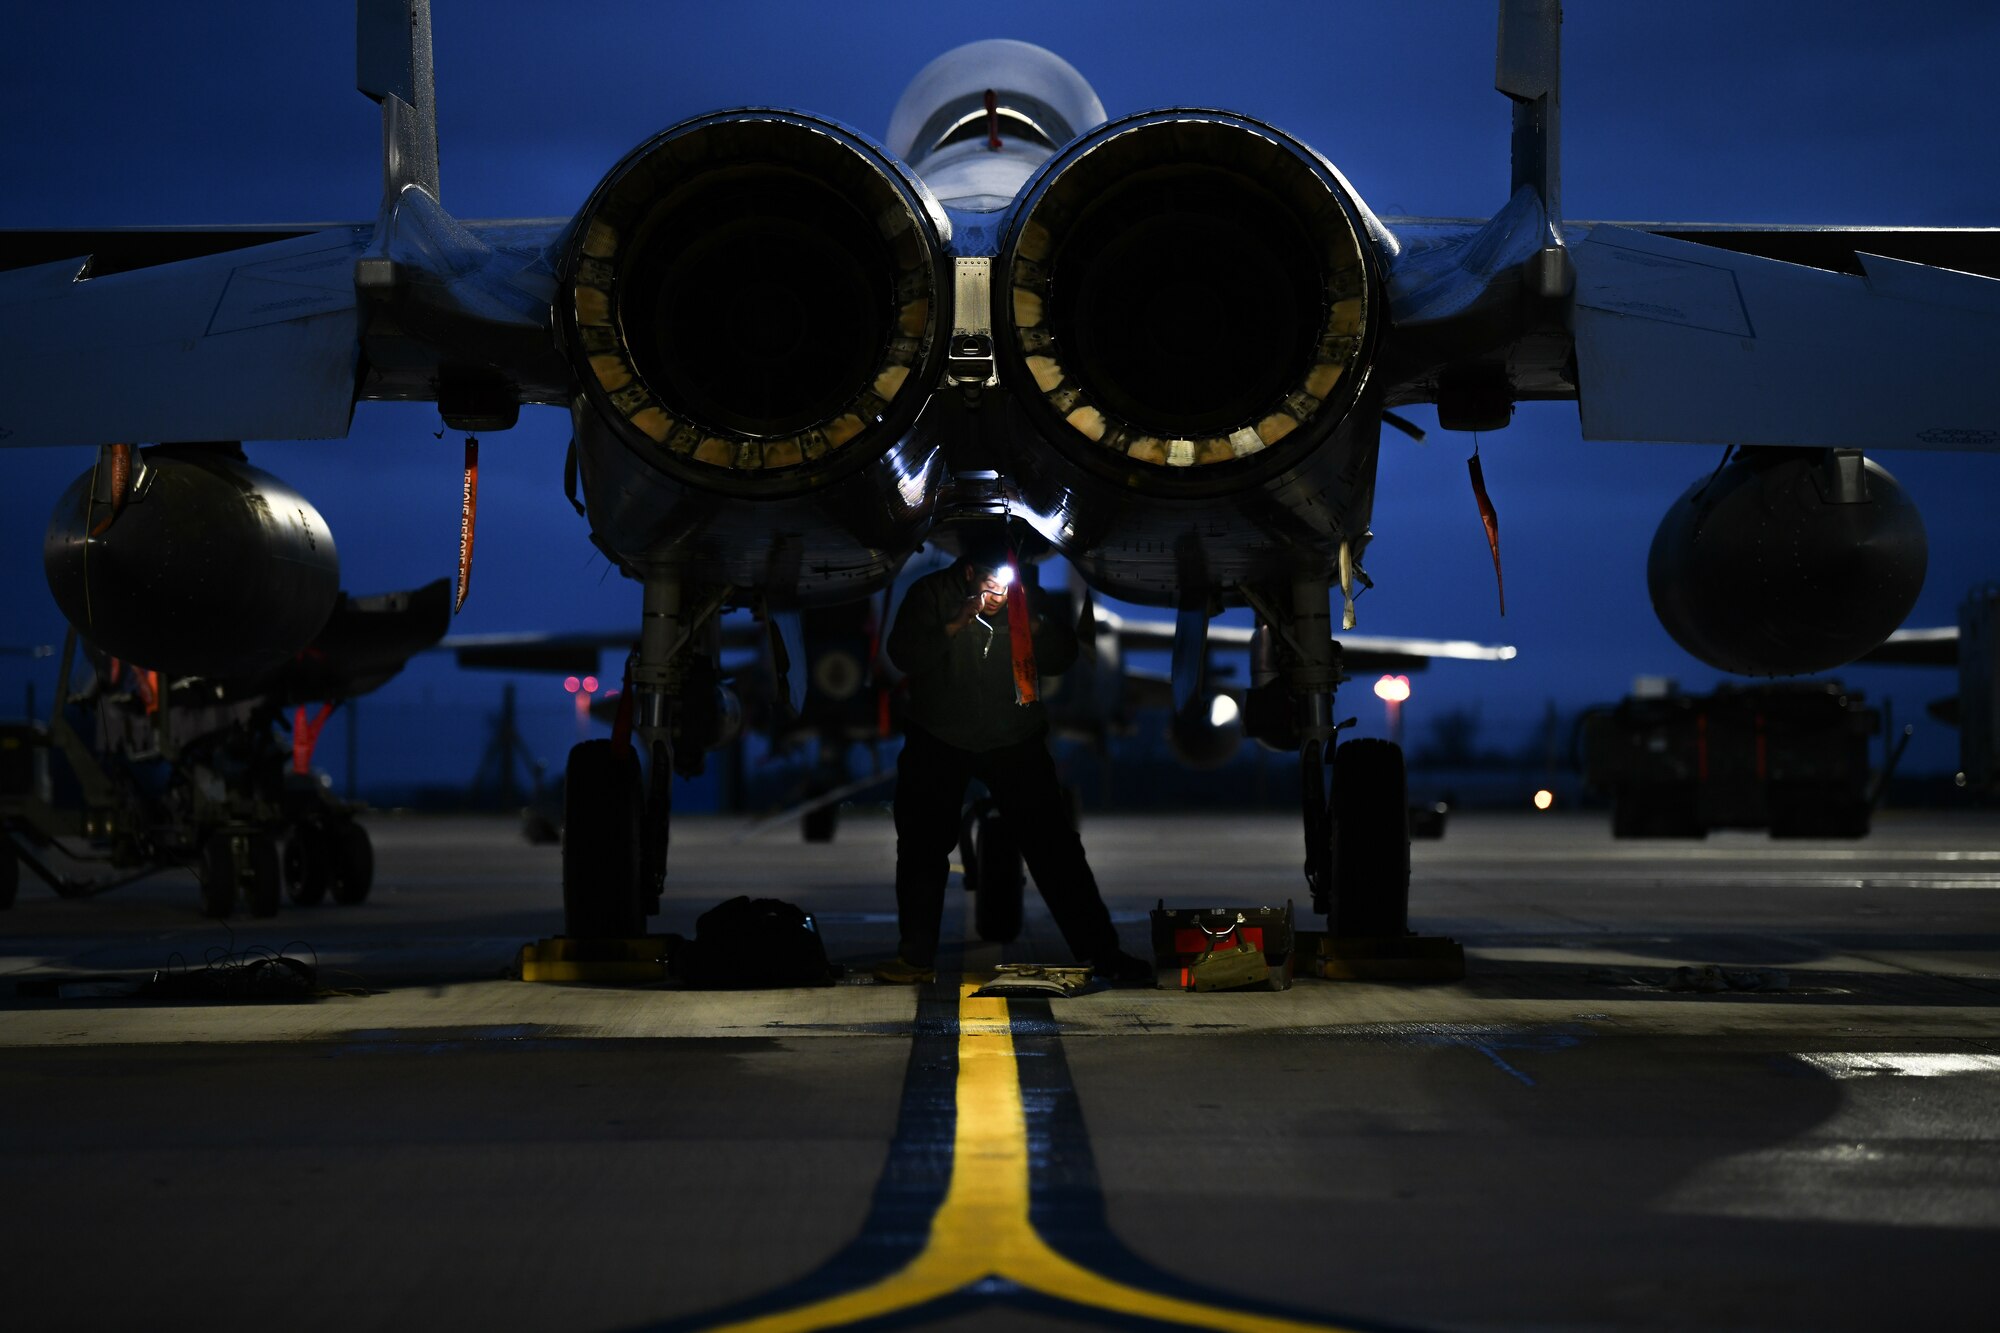 Staff Sgt. Brandon Thomas-Volkov, 494th Aircraft Maintenance Unit dedicated crew chief, inspects the underside of an F-15E Strike Eagle before the first takeoffs of the new year at Royal Air Force Lakenheath, England, Jan. 5, 2021. Dedicated Crew Chiefs are responsible for managing and supervising all maintenance on their respective aircraft by coordinating with other maintenance specialties such as propulsion, hydraulics and fuels to ensure the aircraft is operational in a timely manner. (U.S. Air Force photo by Senior Airman Madeline Herzog)